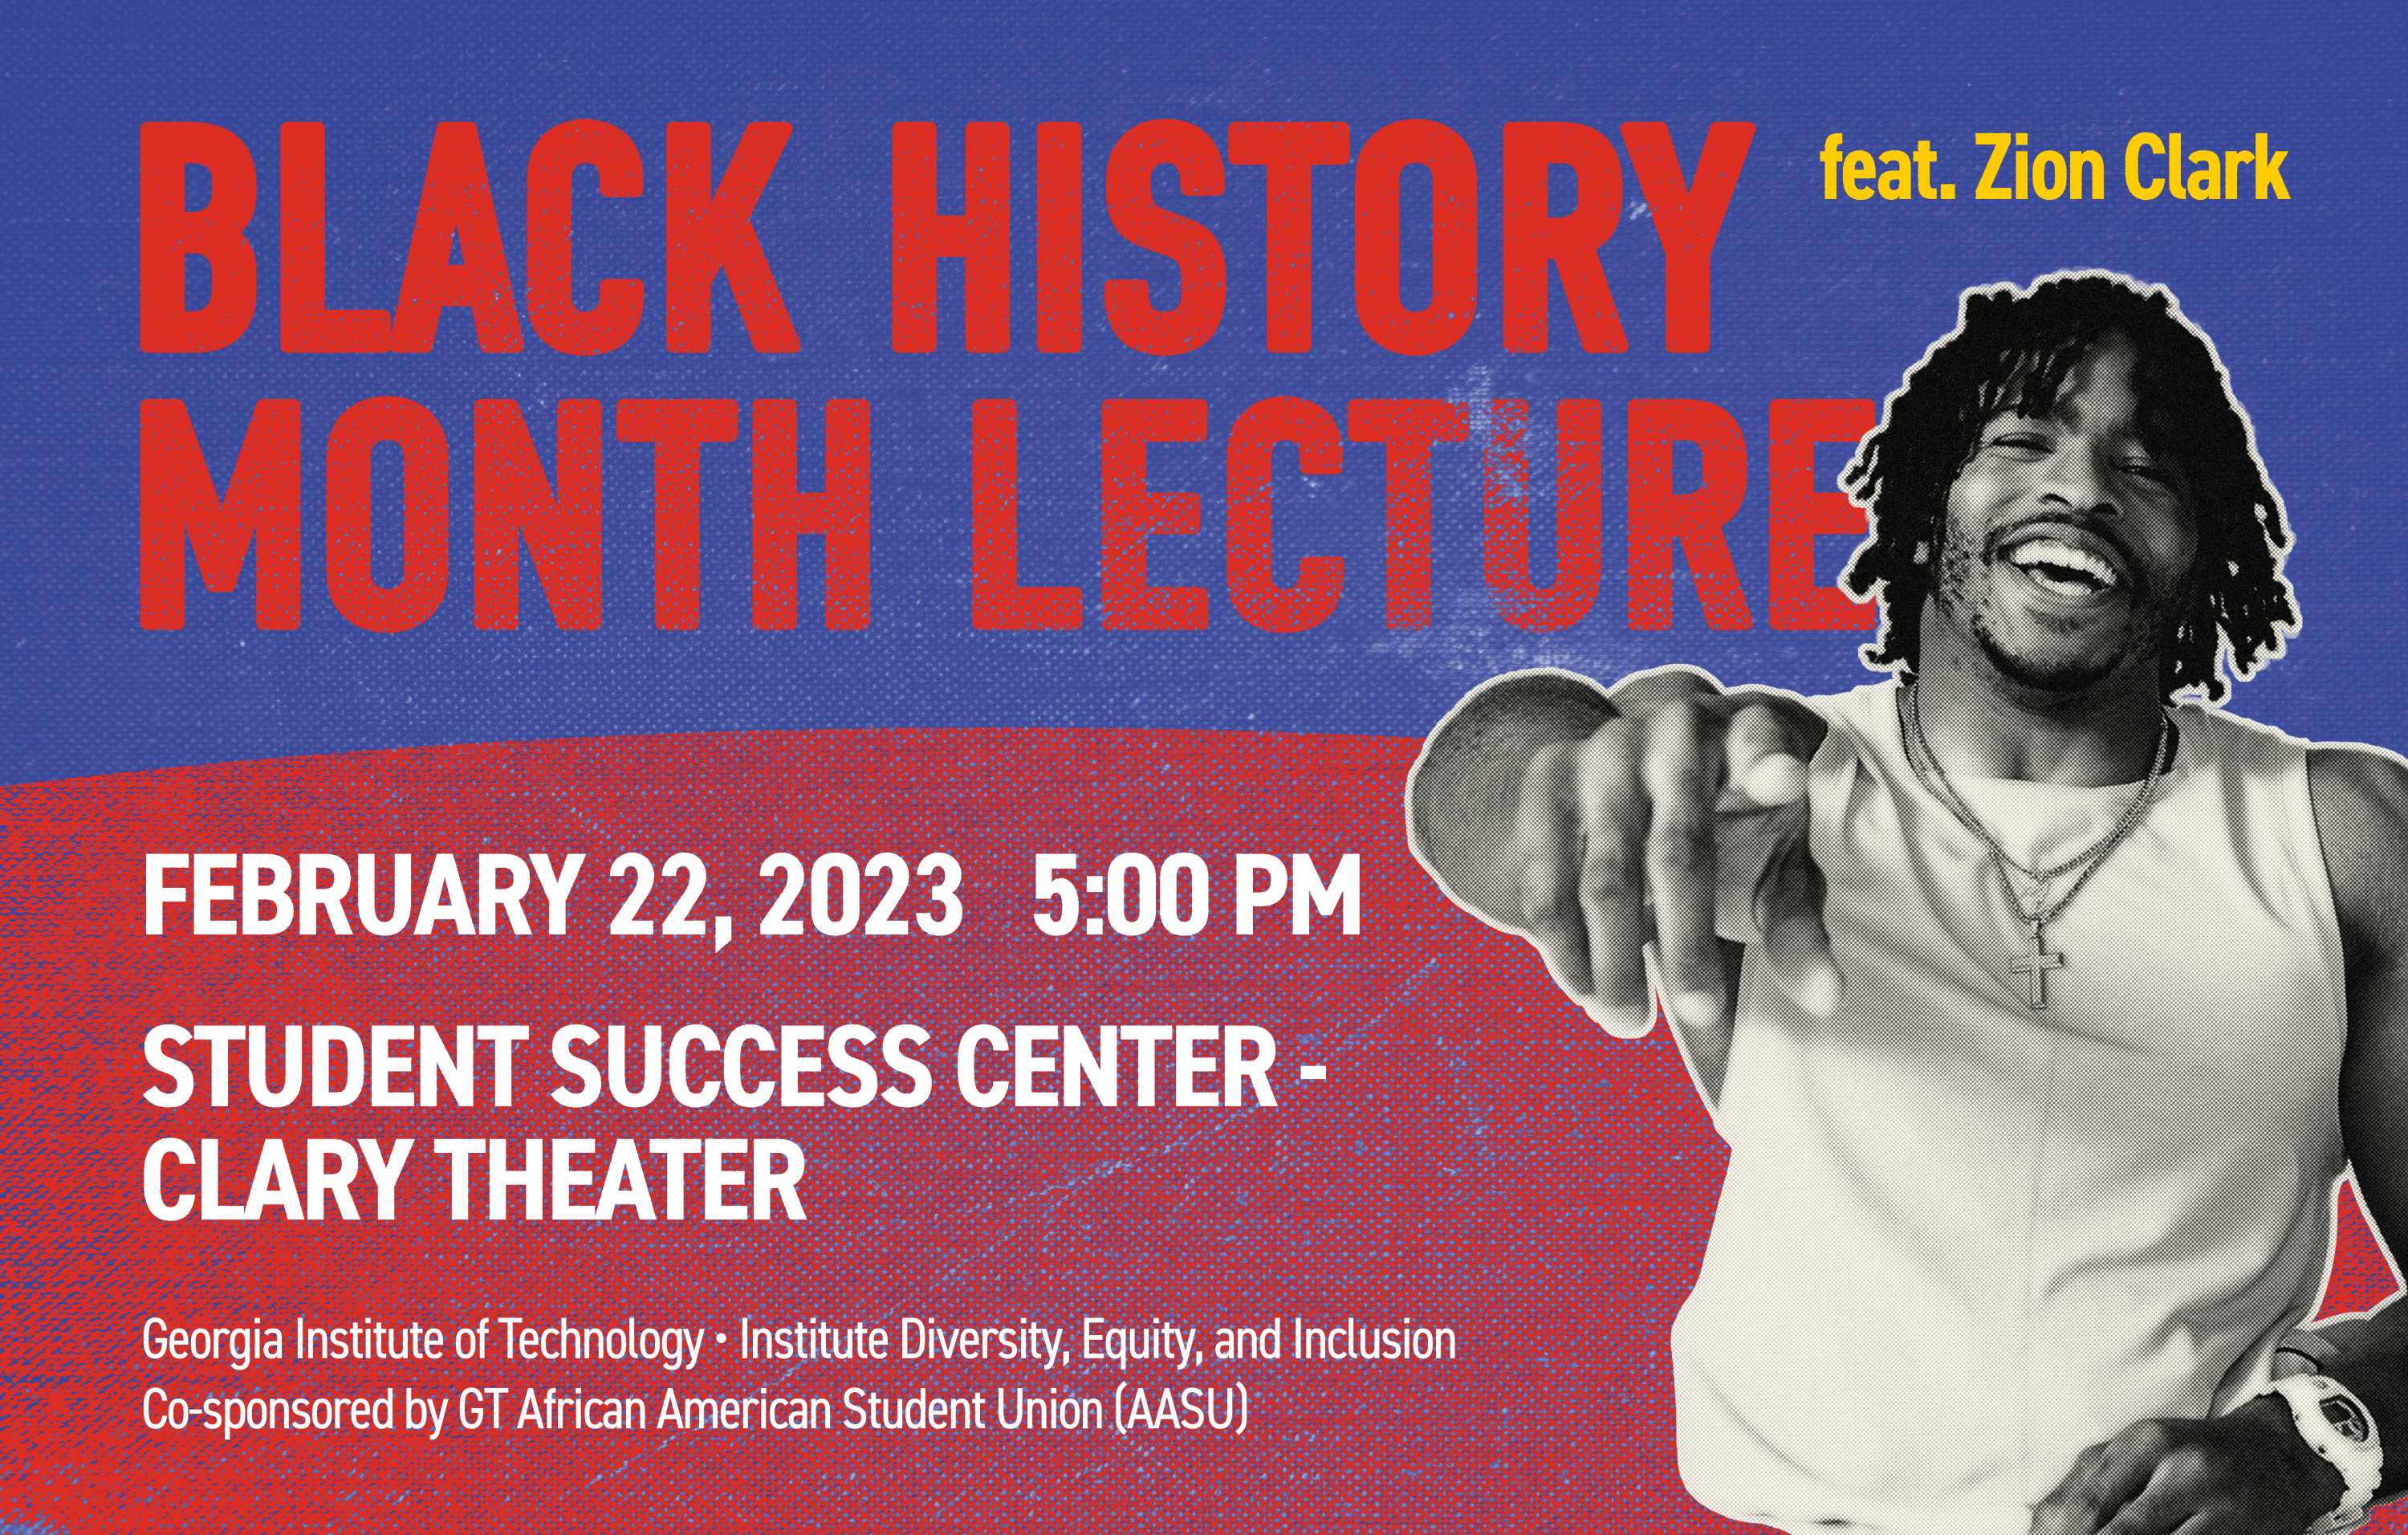 The 2023 Black History Month Lecture will be held on February 22, 2023, featuring Zion Clark, an All-American wrestler, and wheelchair racer.